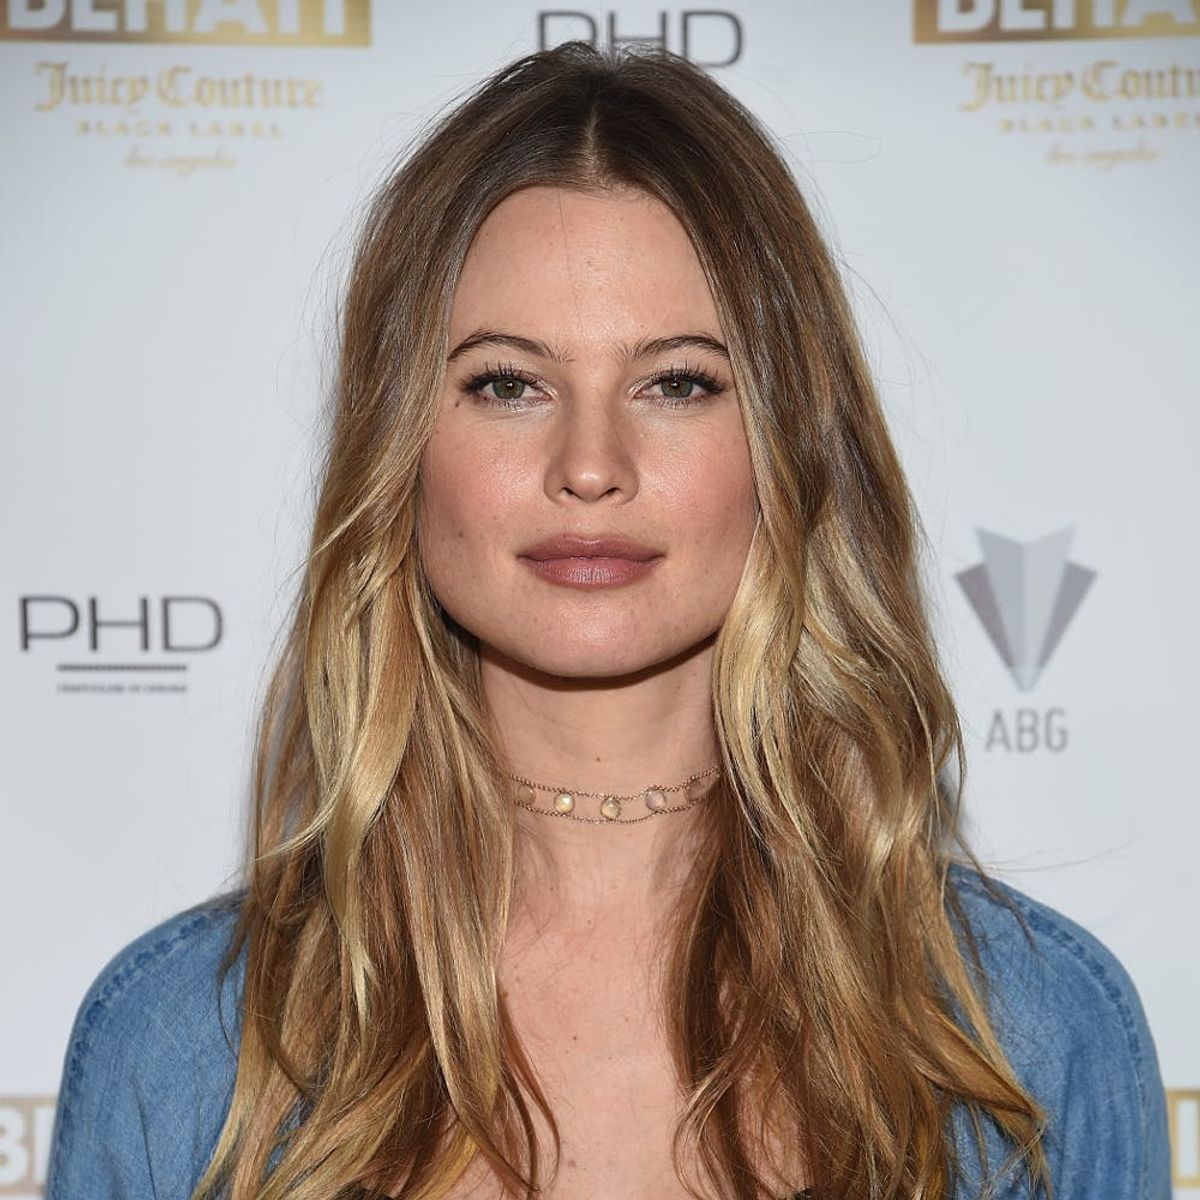 Behati Prinsloo + Candice Swanepoel’s BFF Baby Bumps Are Cute AF